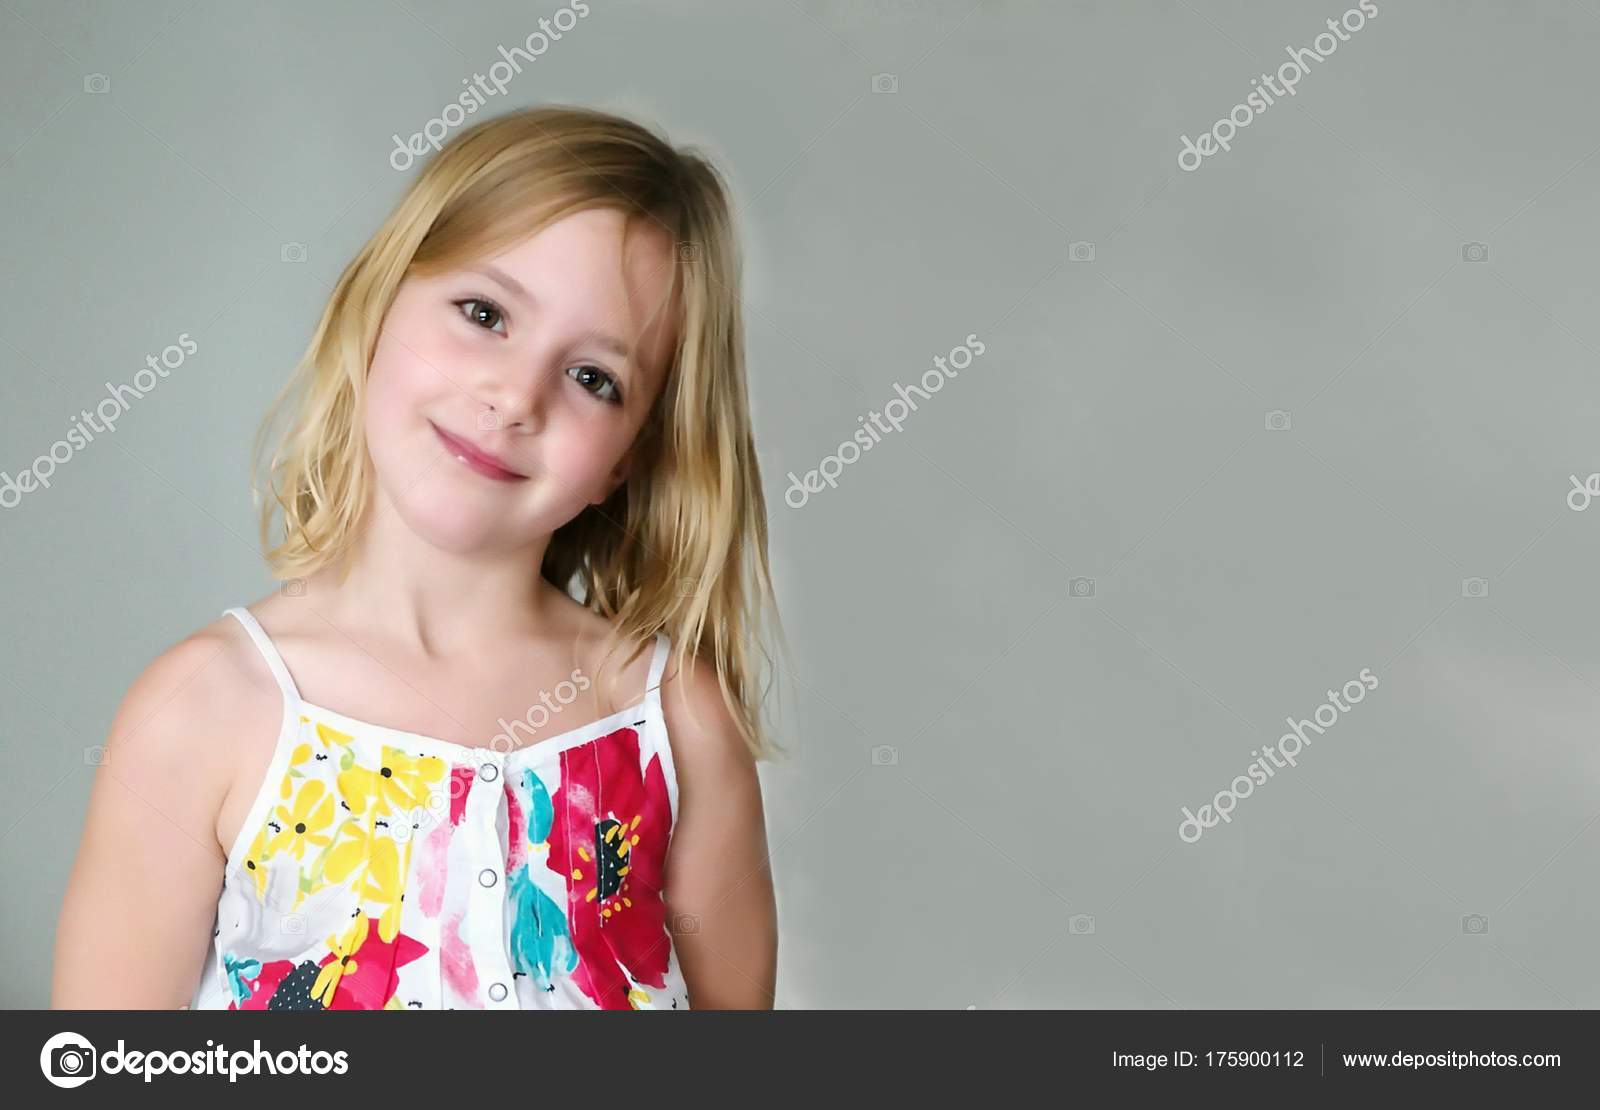 Six Year Old Blonde Girl In A Summer White Dress With Flowers Smiling